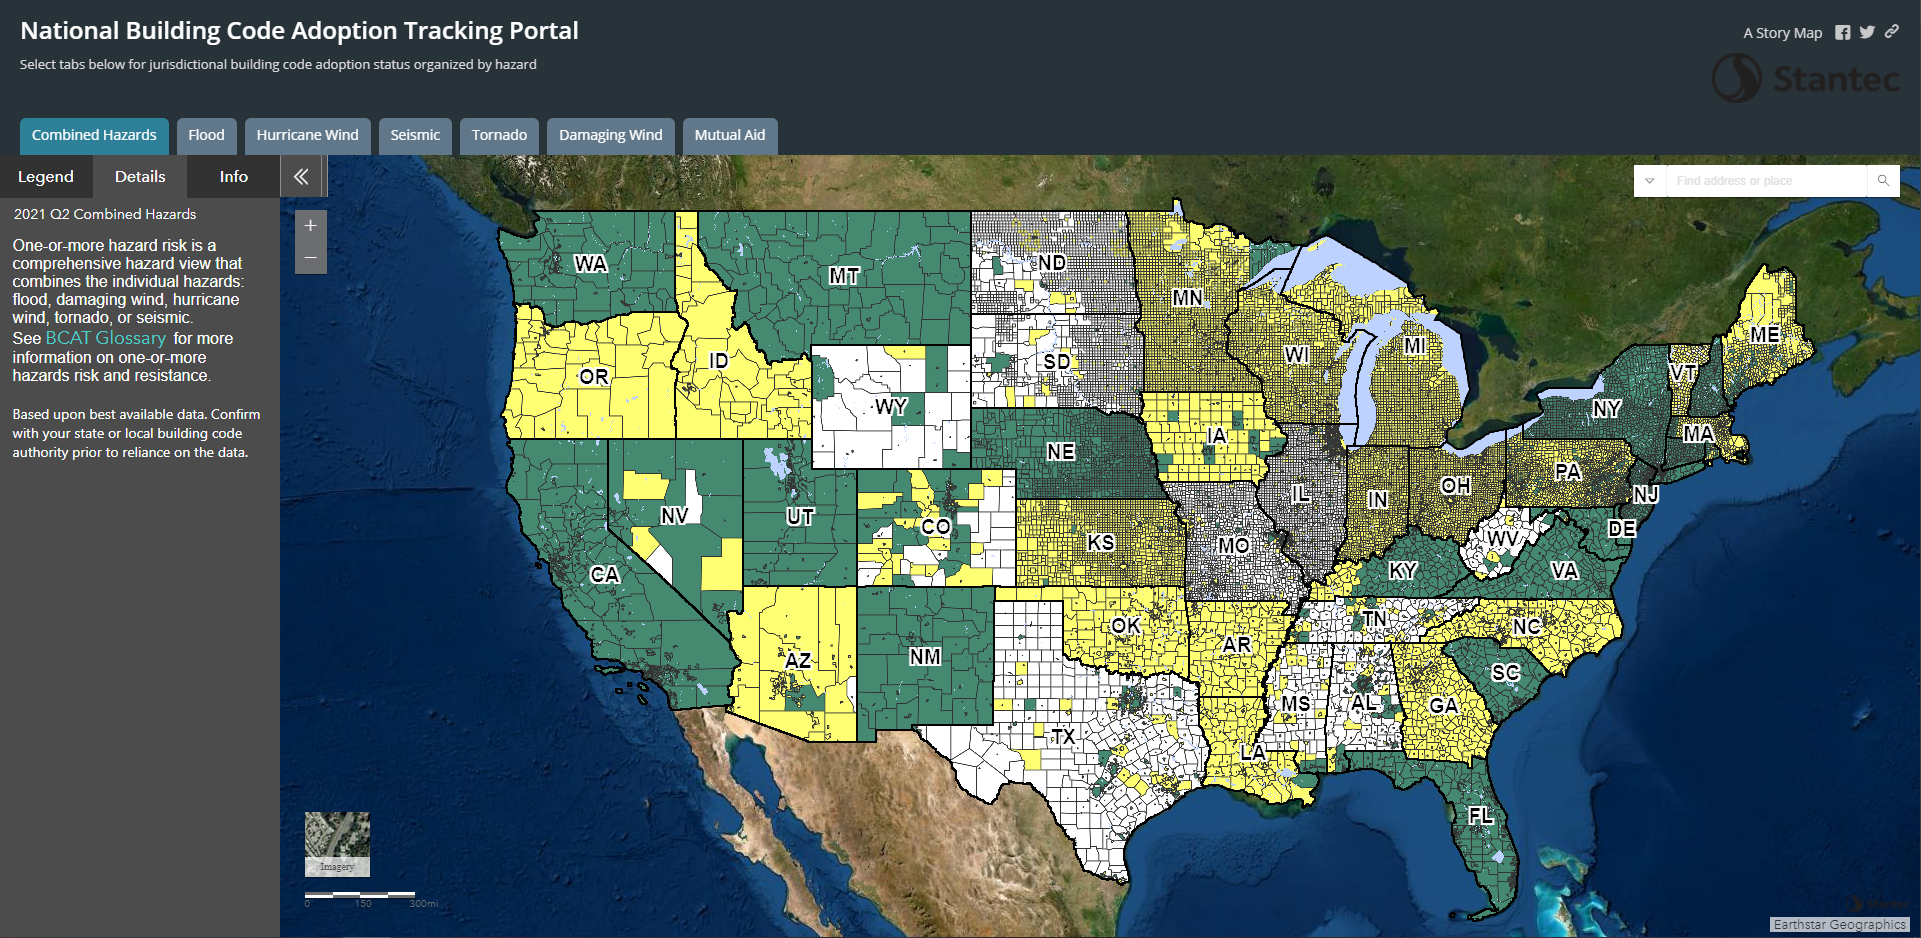 Sample map image from the Building Code Adoption Tracking portal